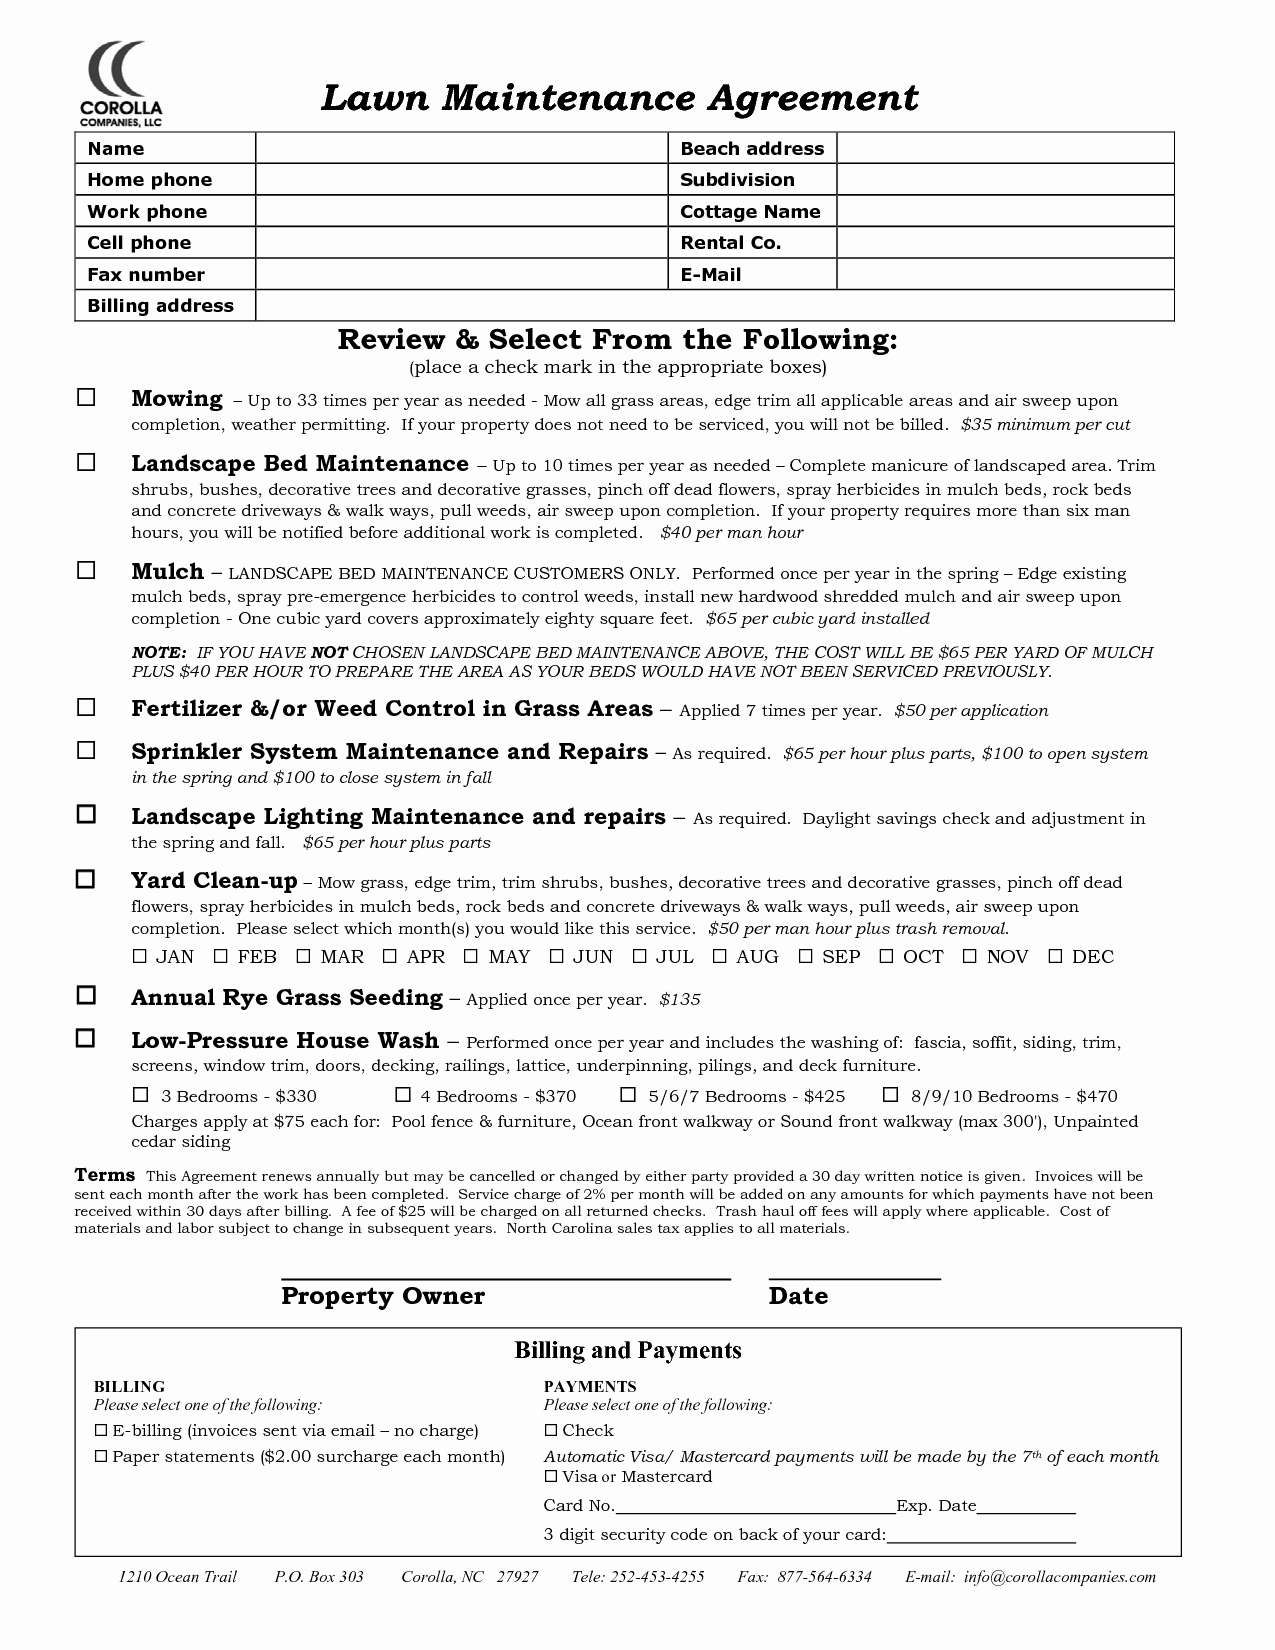 Lawn Care Contract Template Free Awesome Easy and Fast Lawn Care Landscaping Agreement Yahoo